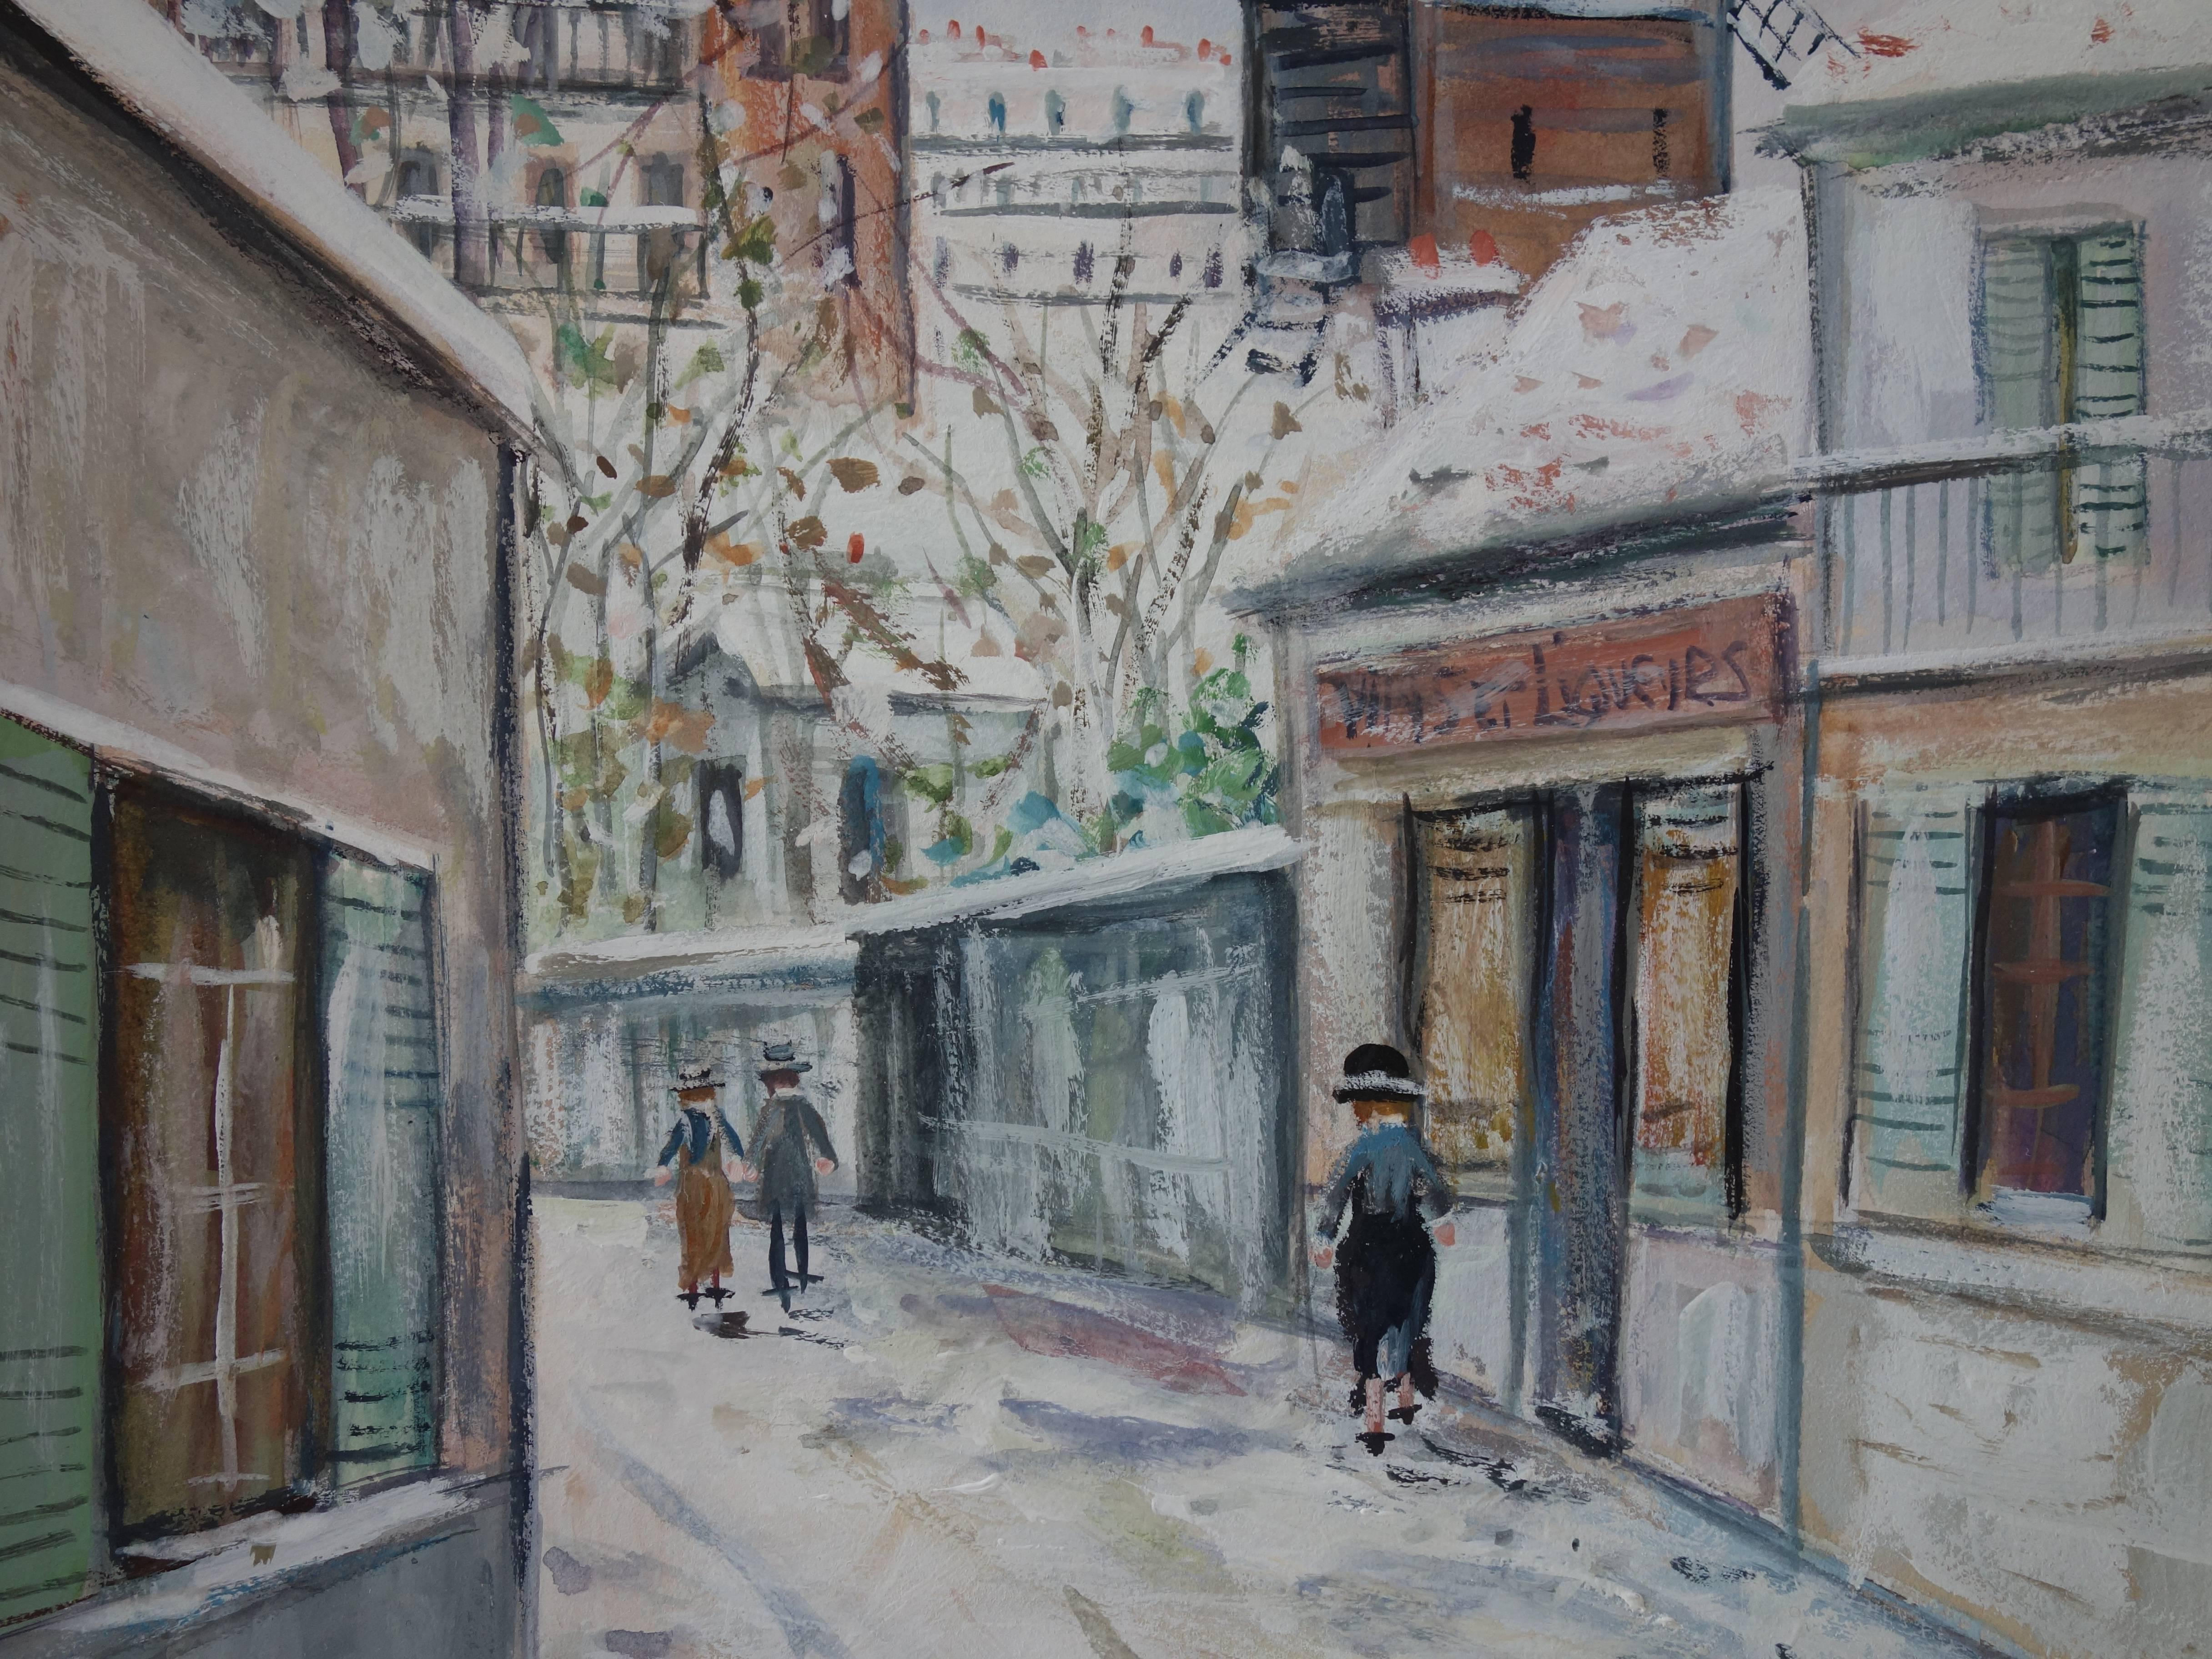 Maurice UTRILLO
Paris : Winter Day at Montmartre

Original gouache painting
Signed bottom right
40 x 32 cm at view (c. 16 x 13